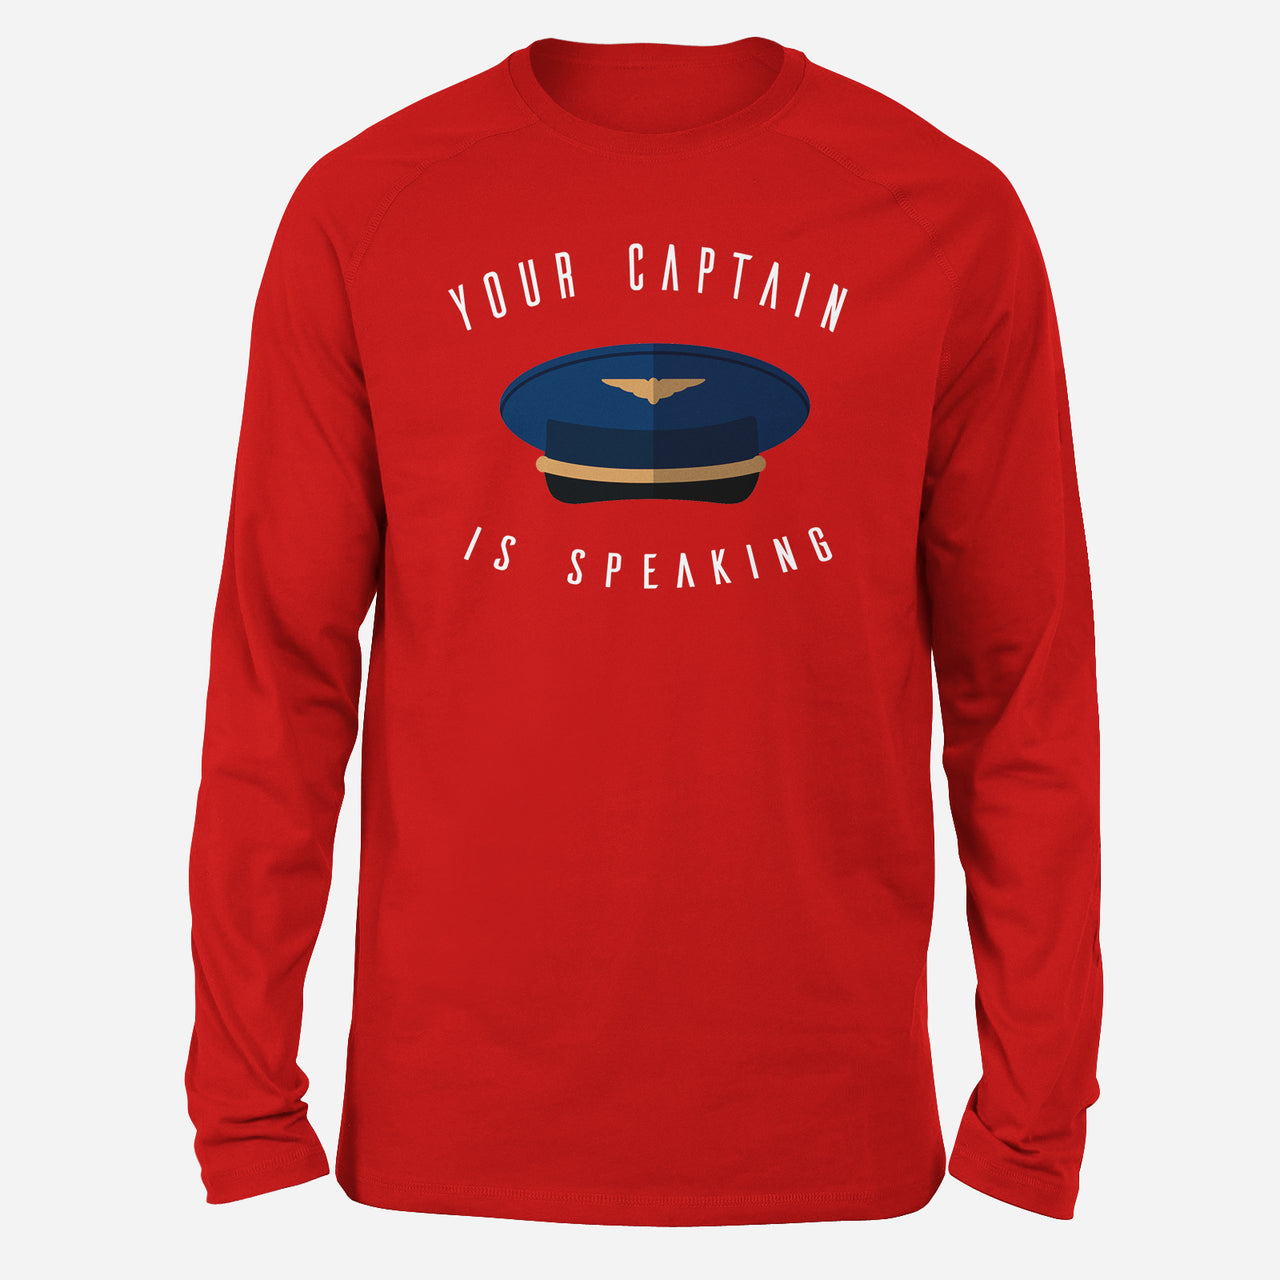 Your Captain Is Speaking Designed Long-Sleeve T-Shirts